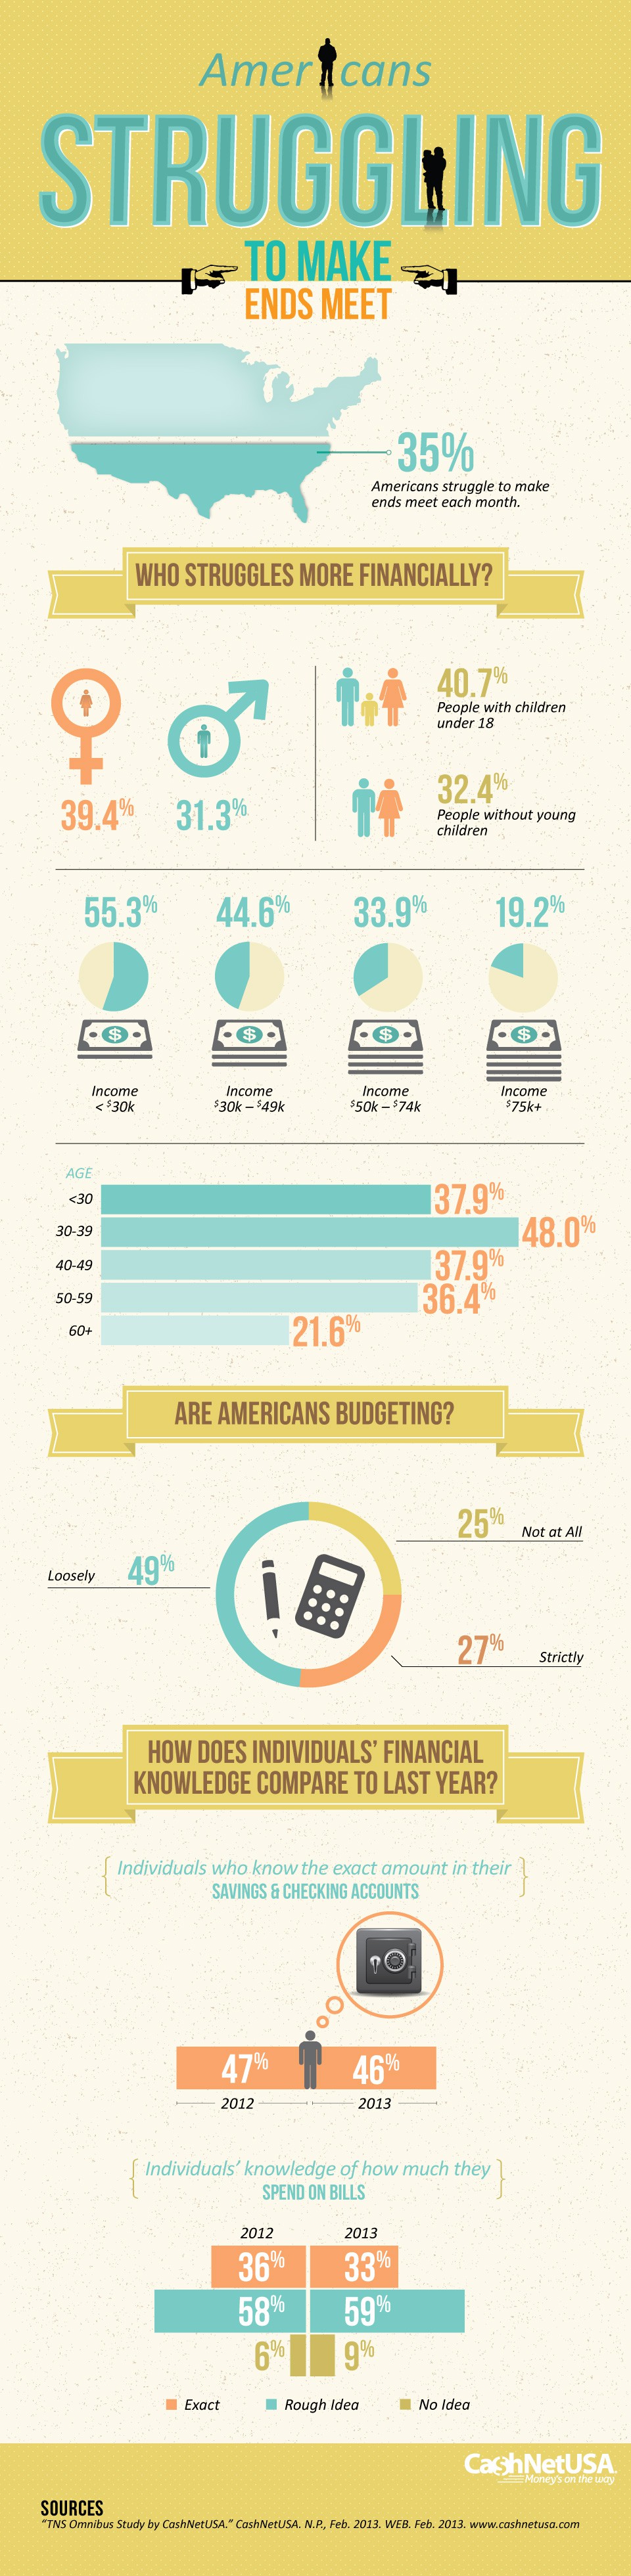 Americans Struggling to Make Ends Meet Infographic